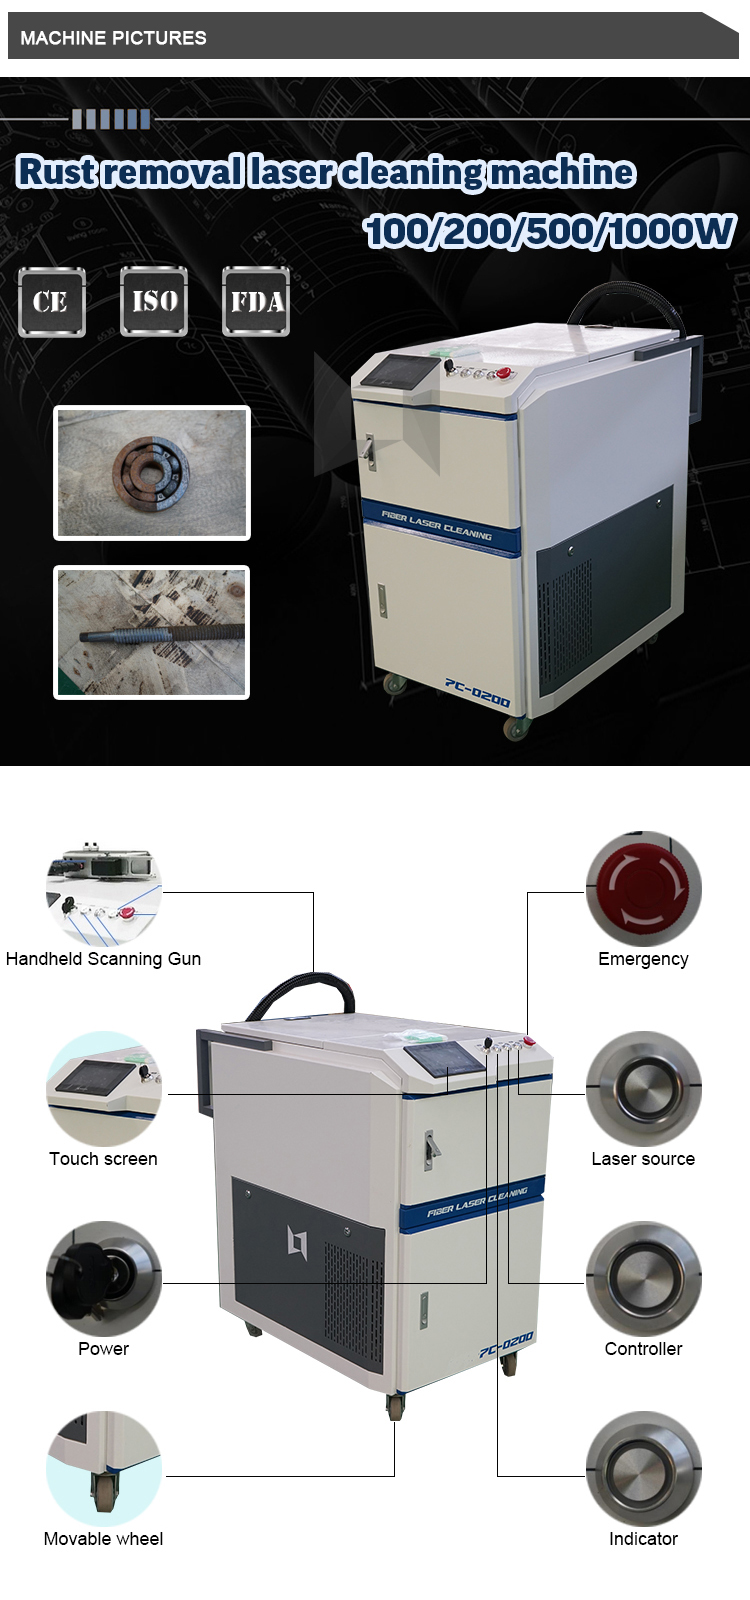 Hot Selling Portable Cnc Factory Rust Removal 1000W Laser Cleaning Machine Made In China